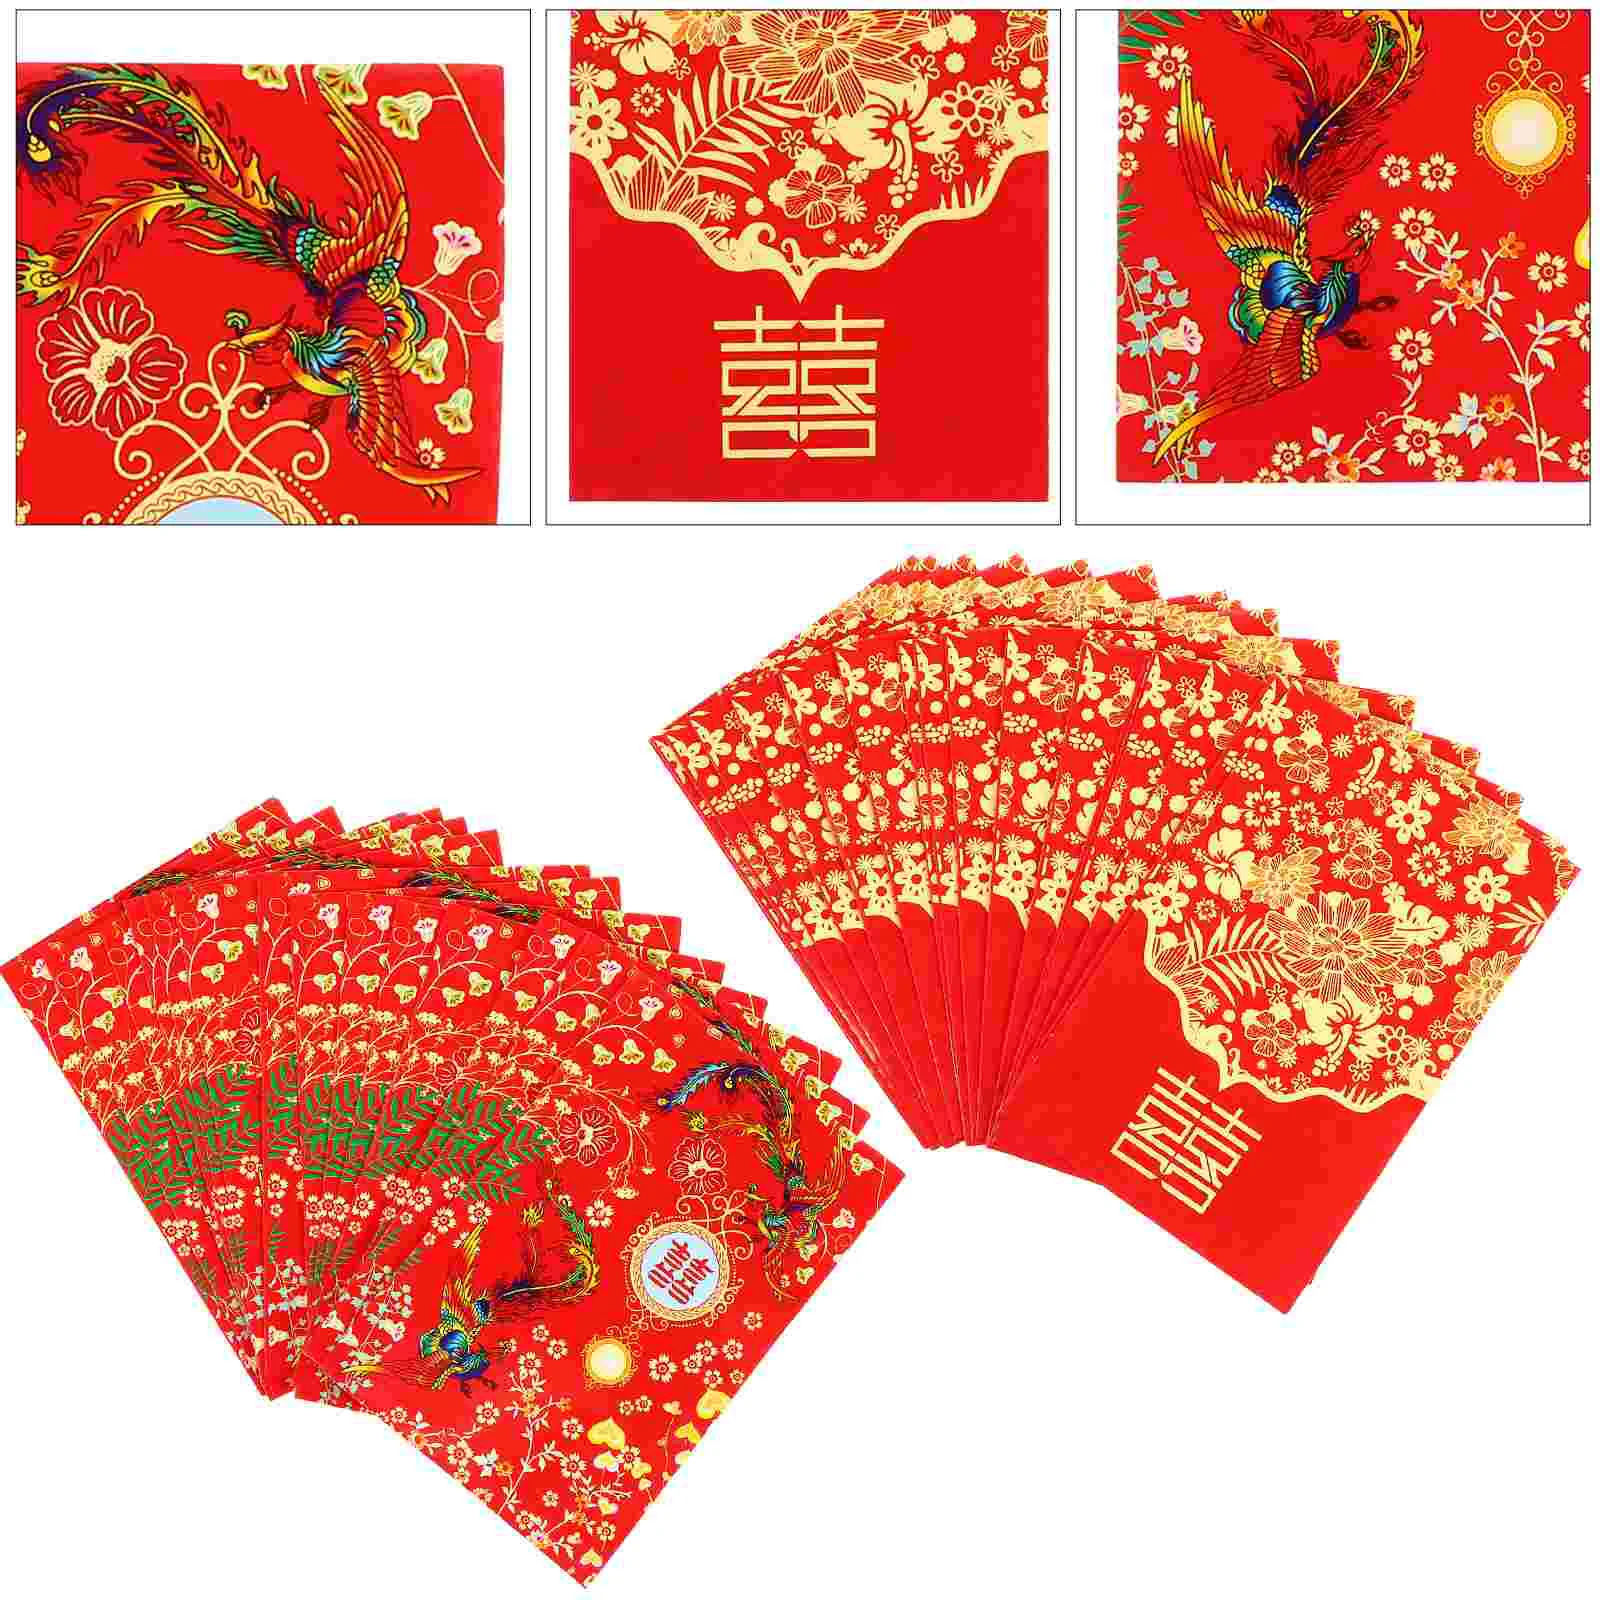 

80 Pcs Chinese Red Envelope Wedding Money Envelopes Hong Bao Bunny Gift Lucky Pockets Bags Paper Packet Hongbao Packets